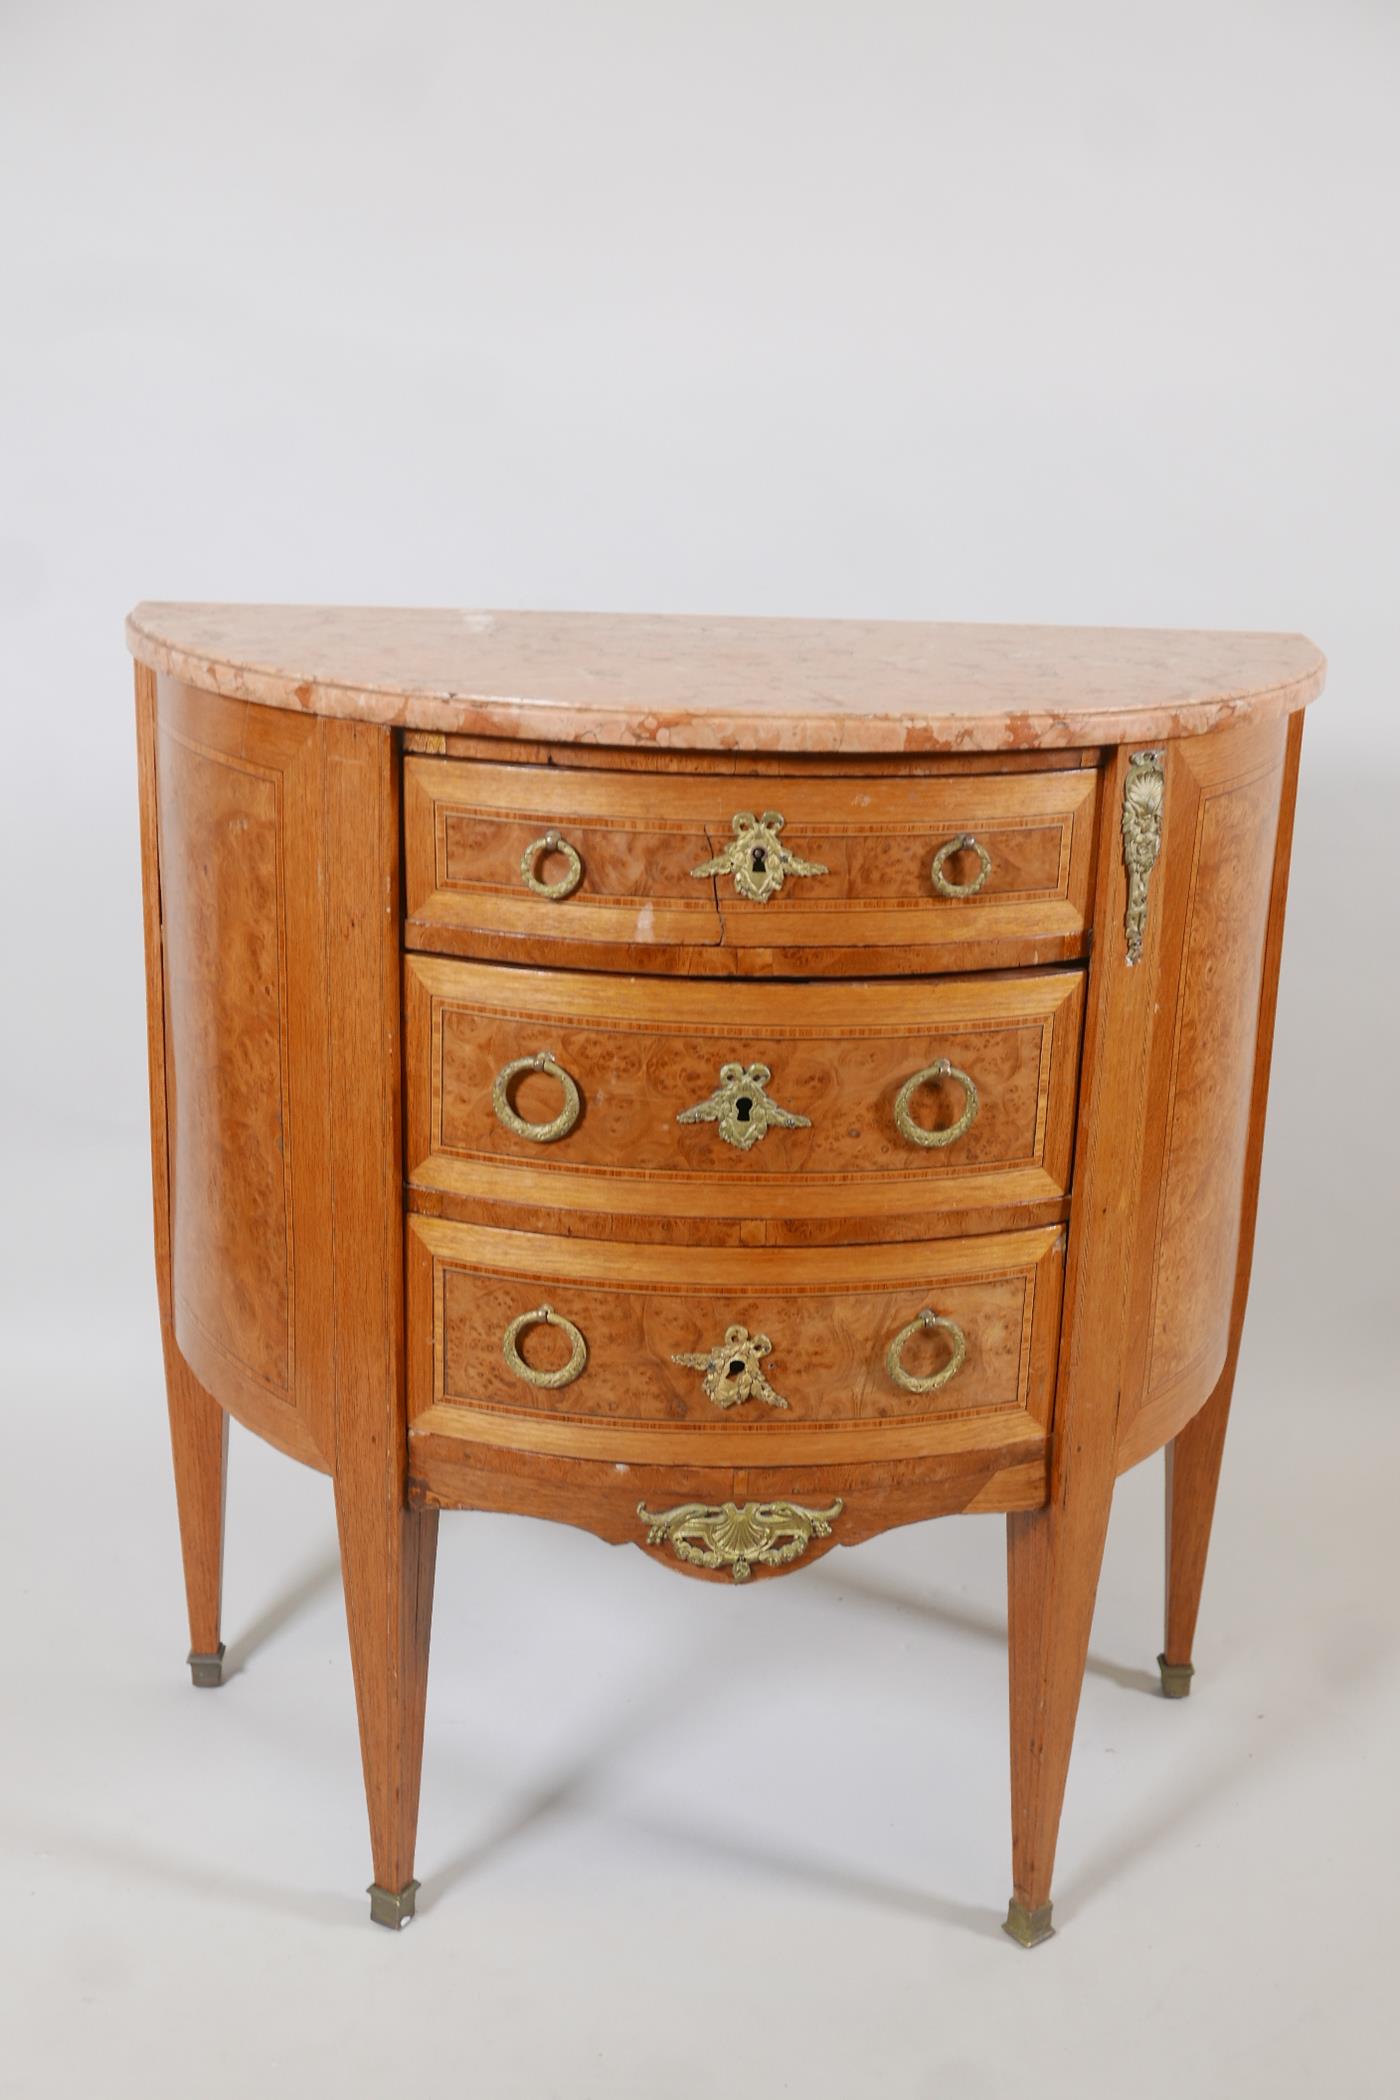 A Louis XV style demi-lune three drawer commode, with inset burr walnut inlaid panels, brass handles - Image 2 of 3